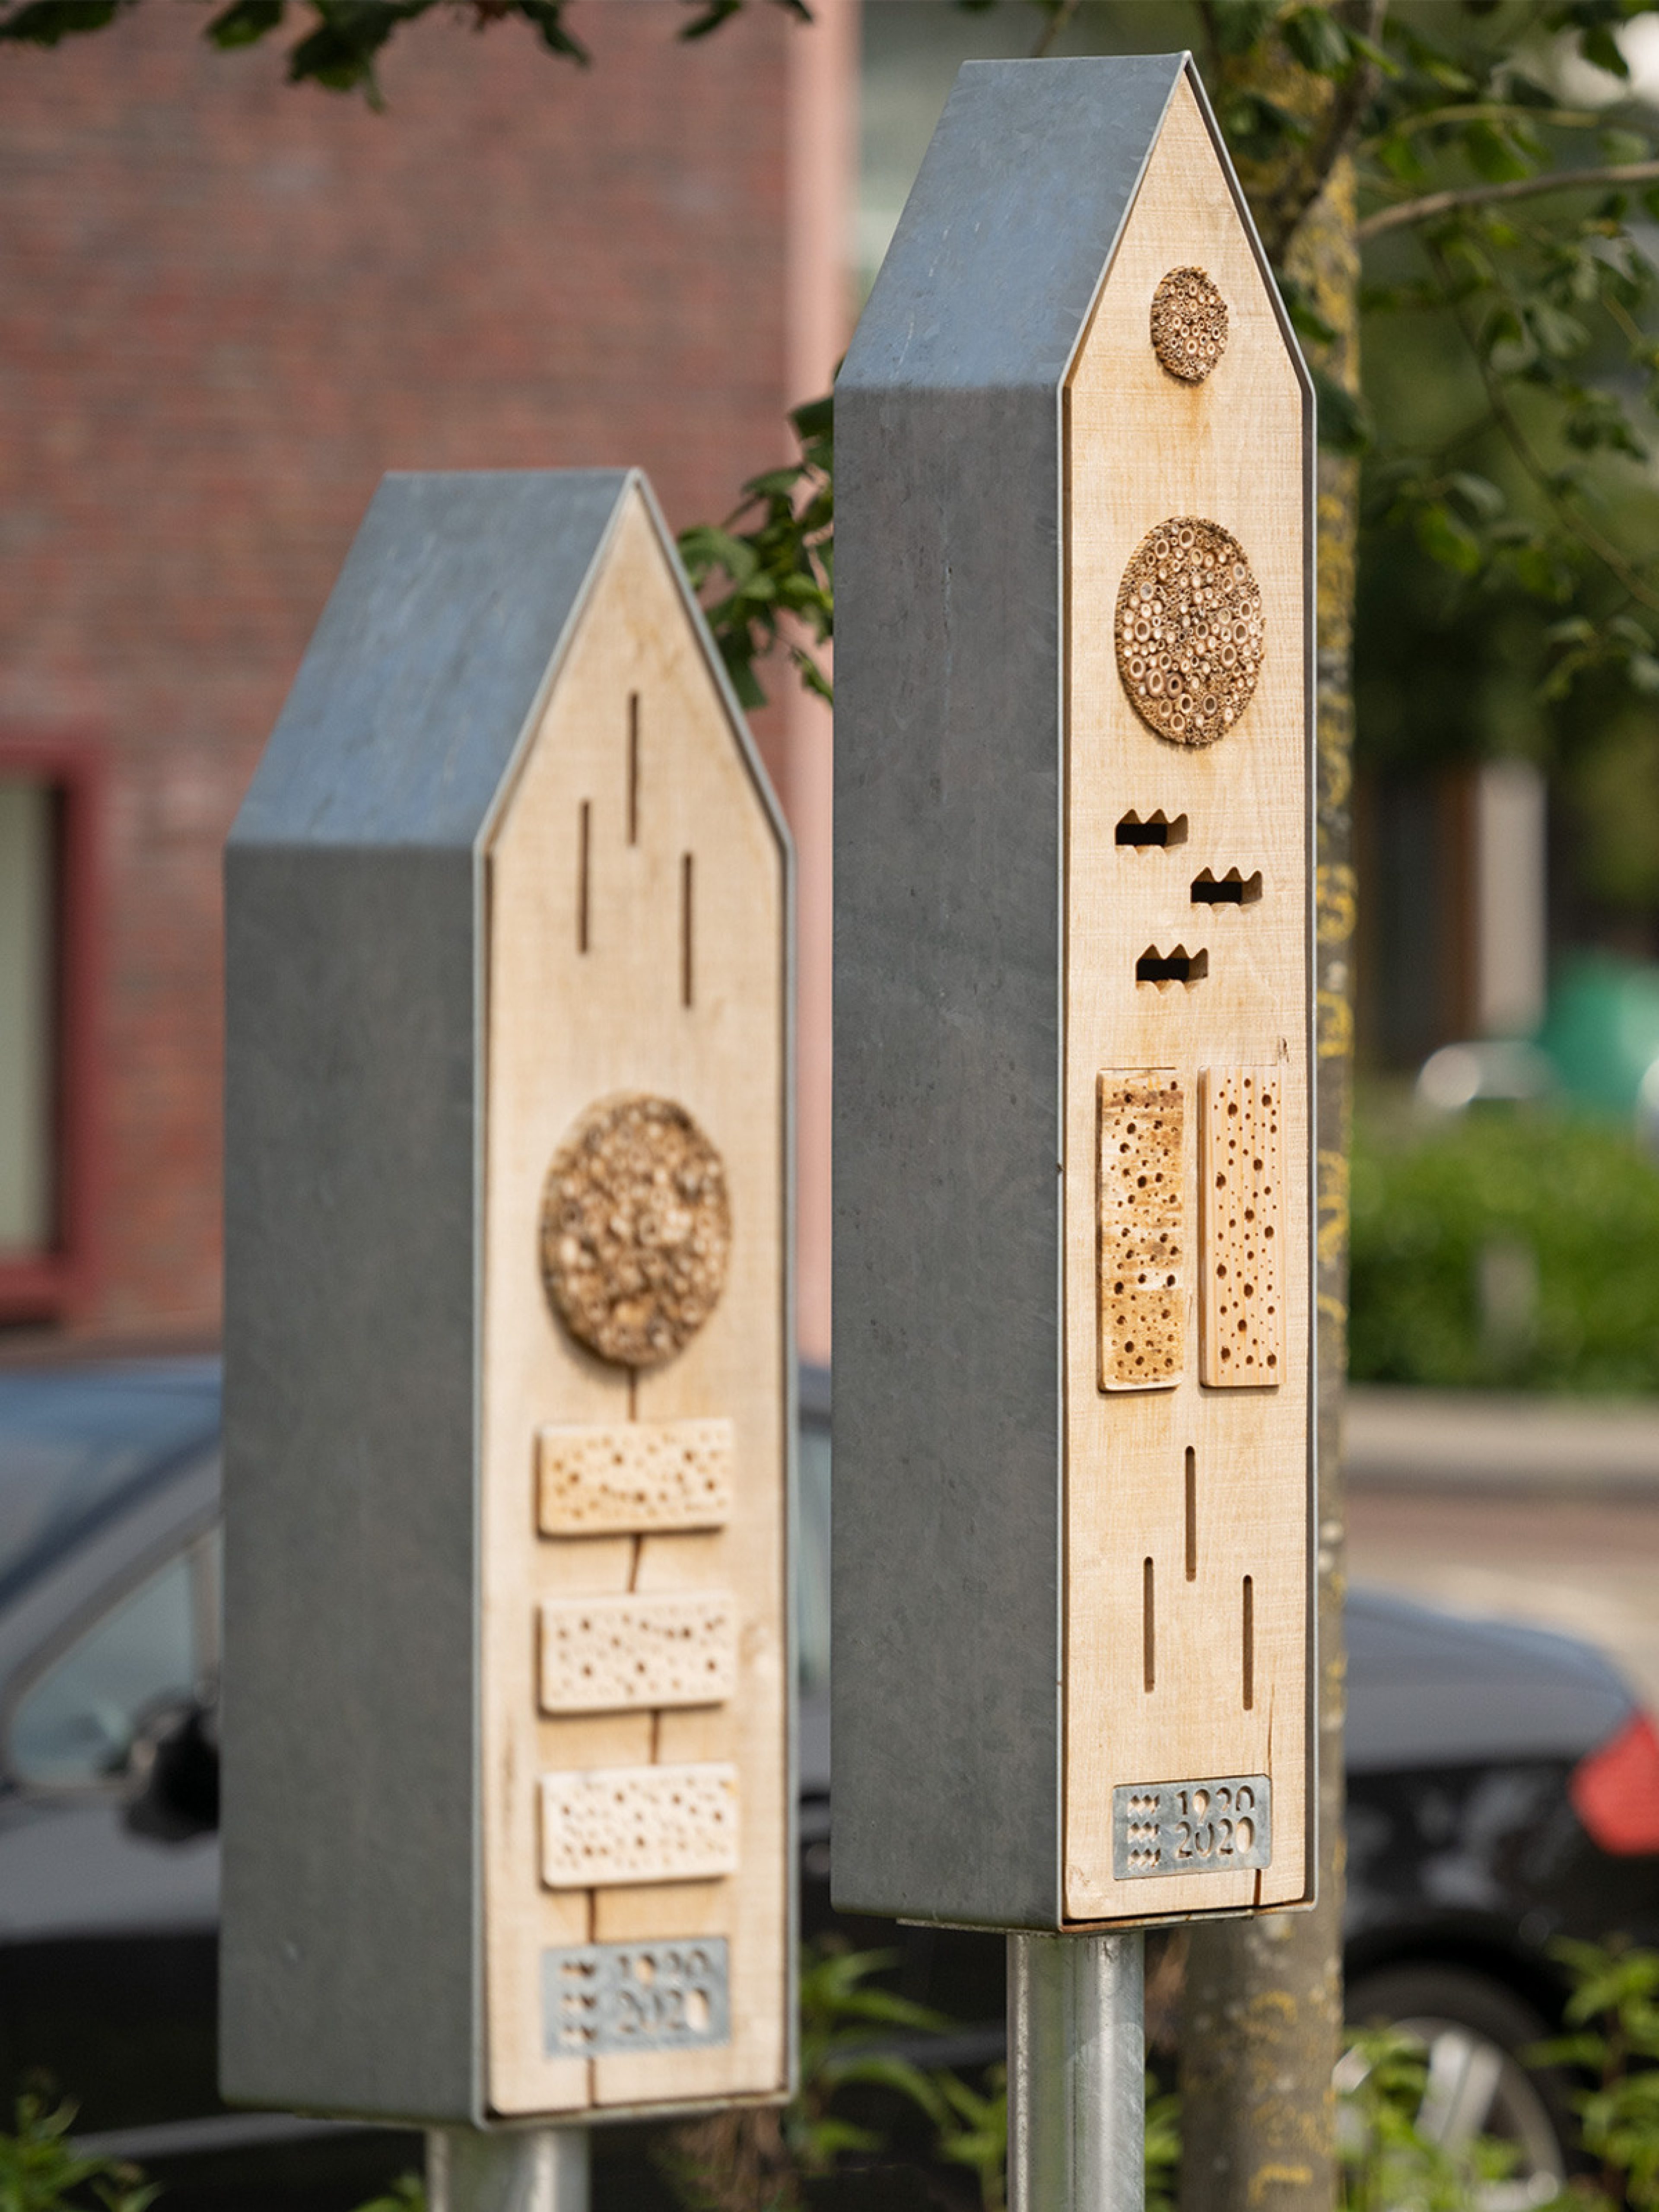 Insect hotels for livable neighborhoods